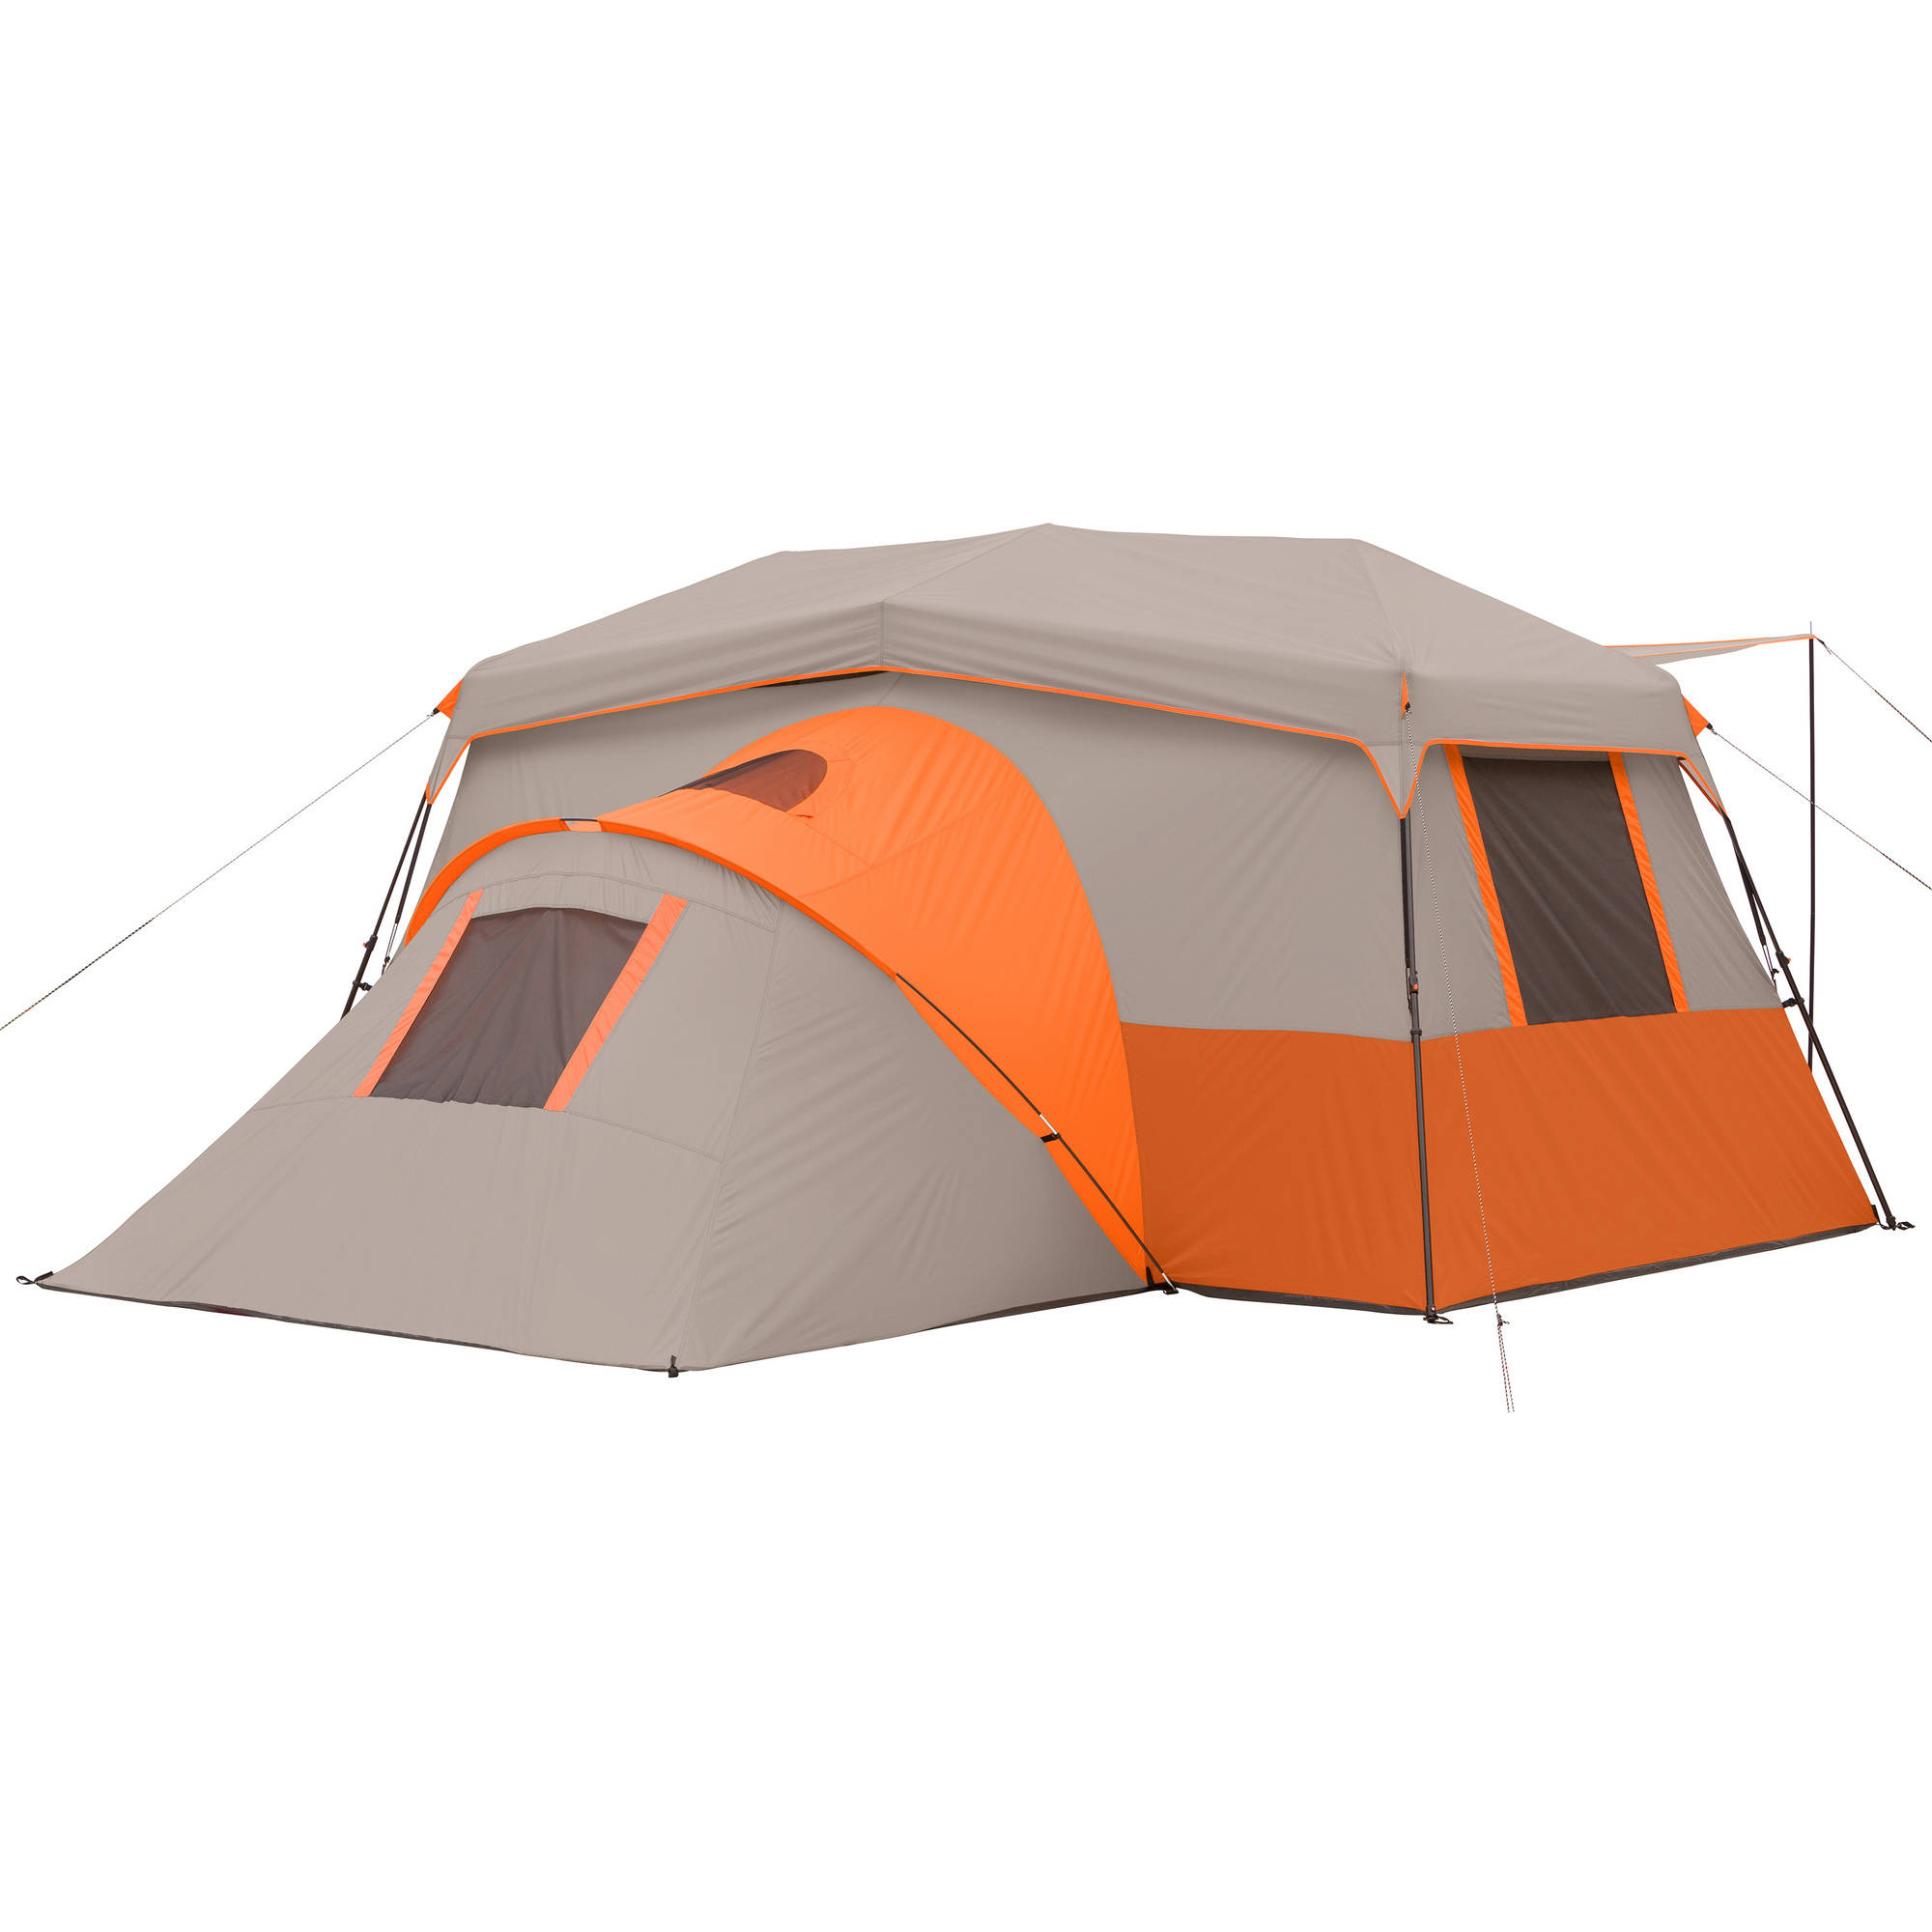 Ozark Trail  14' x 14' 11-Person Instant Cabin Tent with Private Room, 38.37 lbs - image 3 of 7